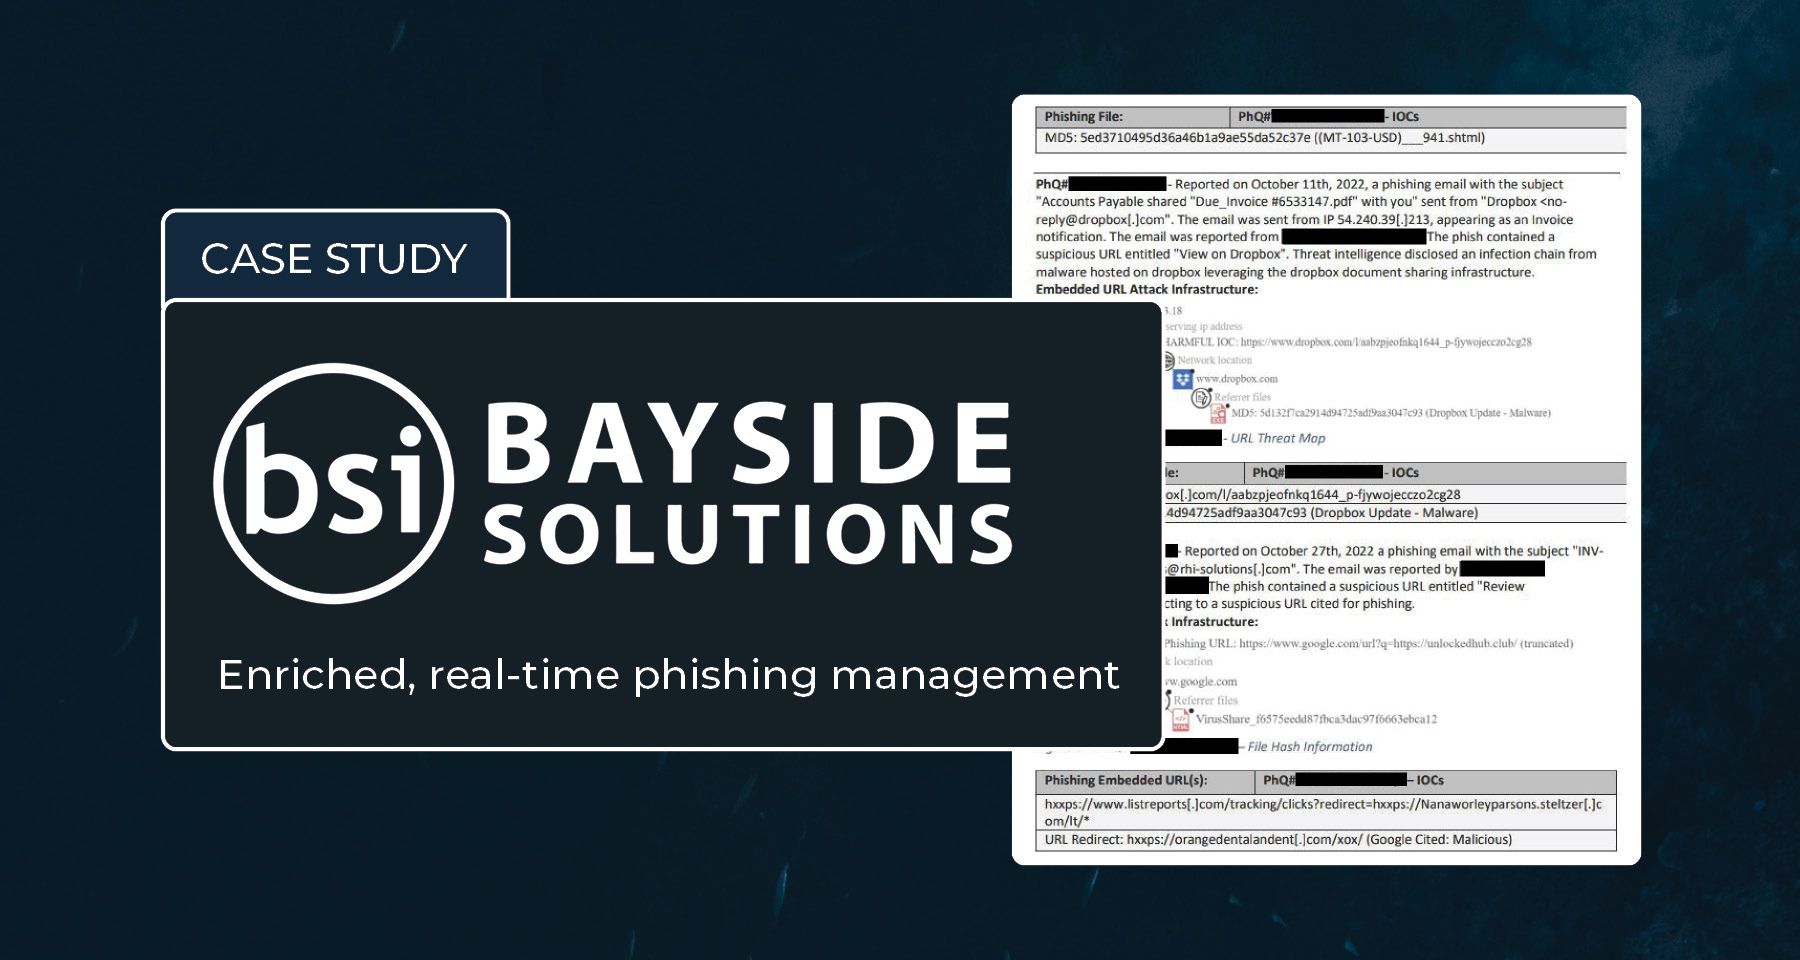 Enriched, real-time phishing management